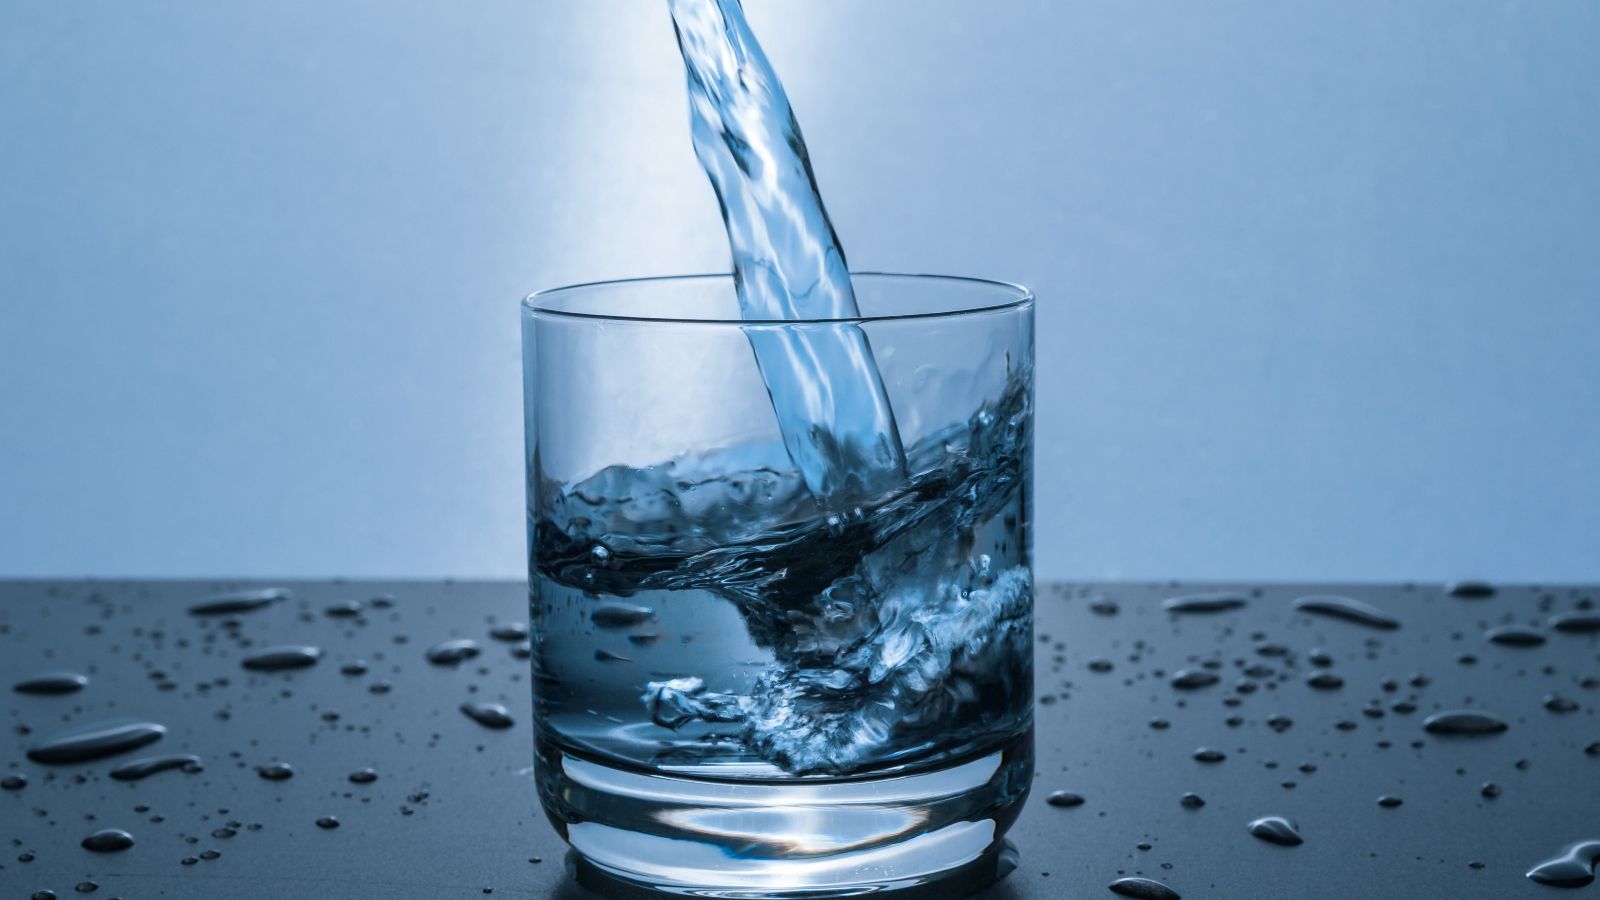 Glass of drinking water on a bench banner image